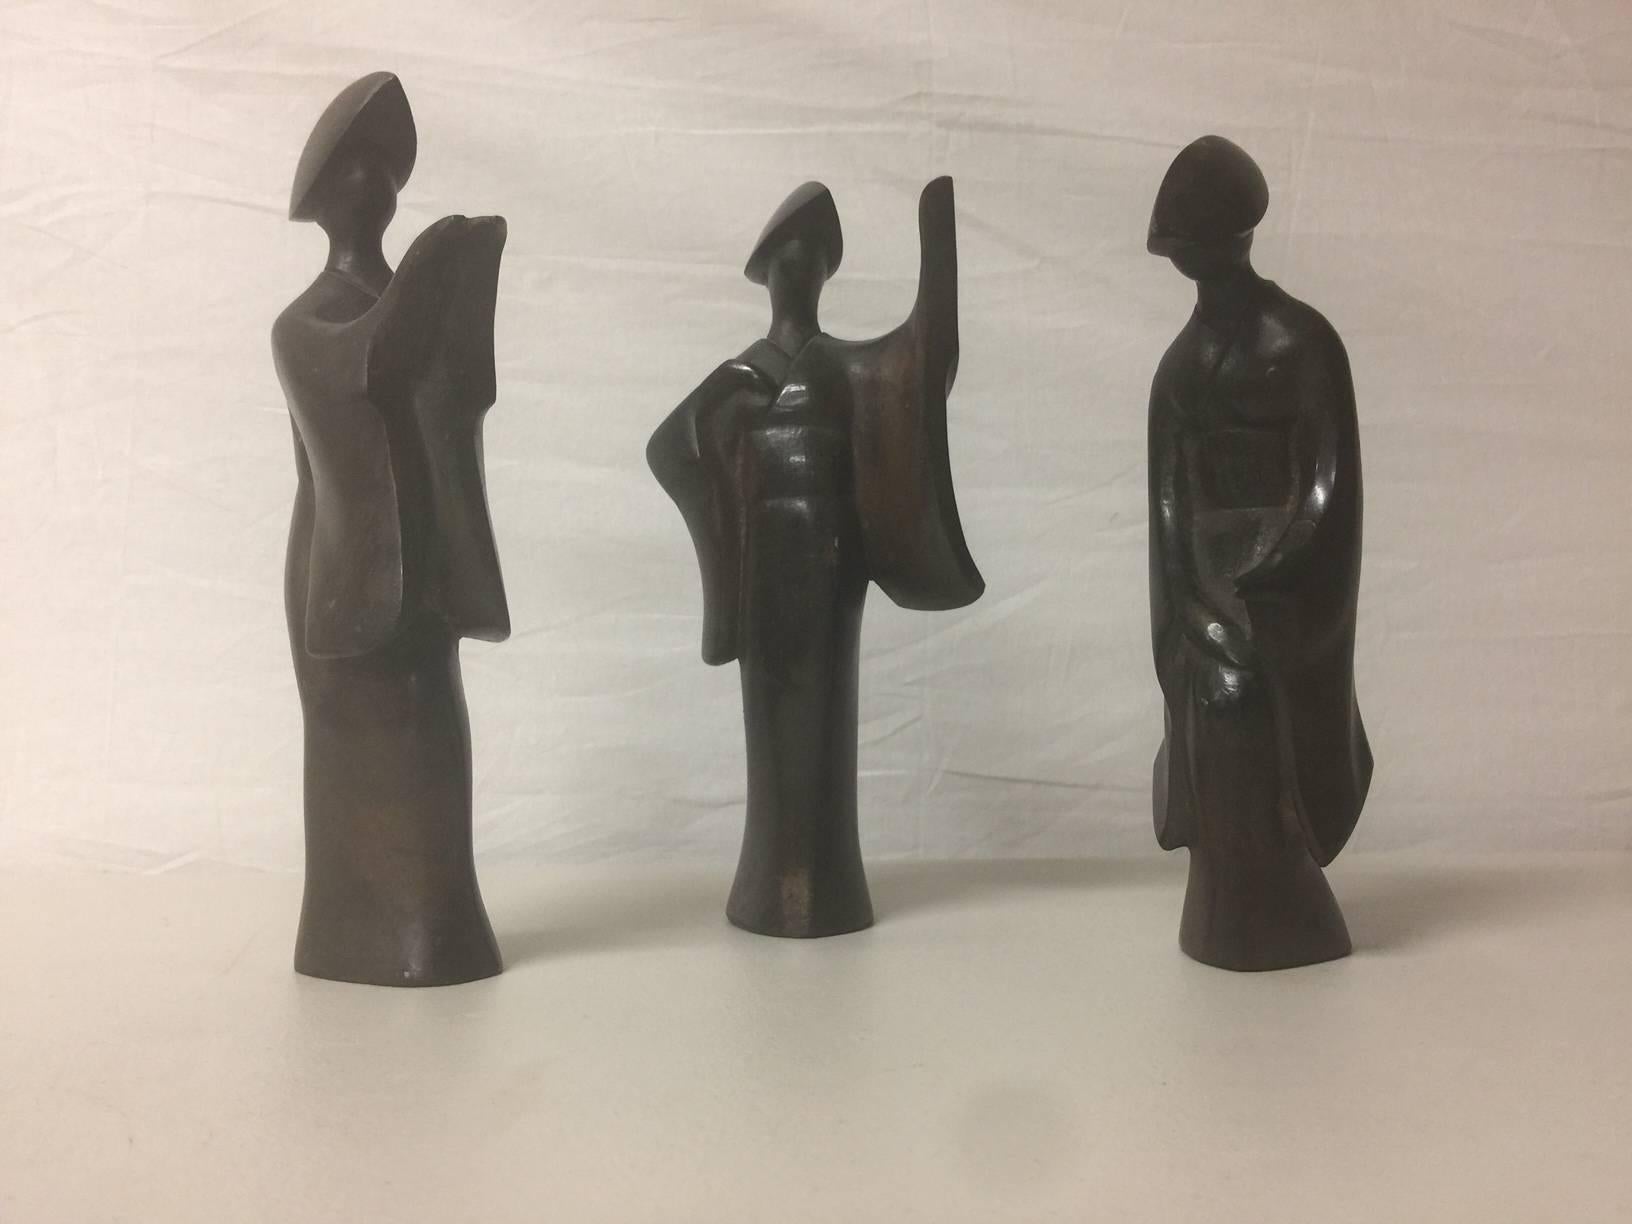 A very cool set of three large (9" tall) bronze Japanese geisha figurines, circa 1960s. The pieces are very heavy and solid and have a real nice dark patina; they would make a great Mid-Century Modern accent in any space!